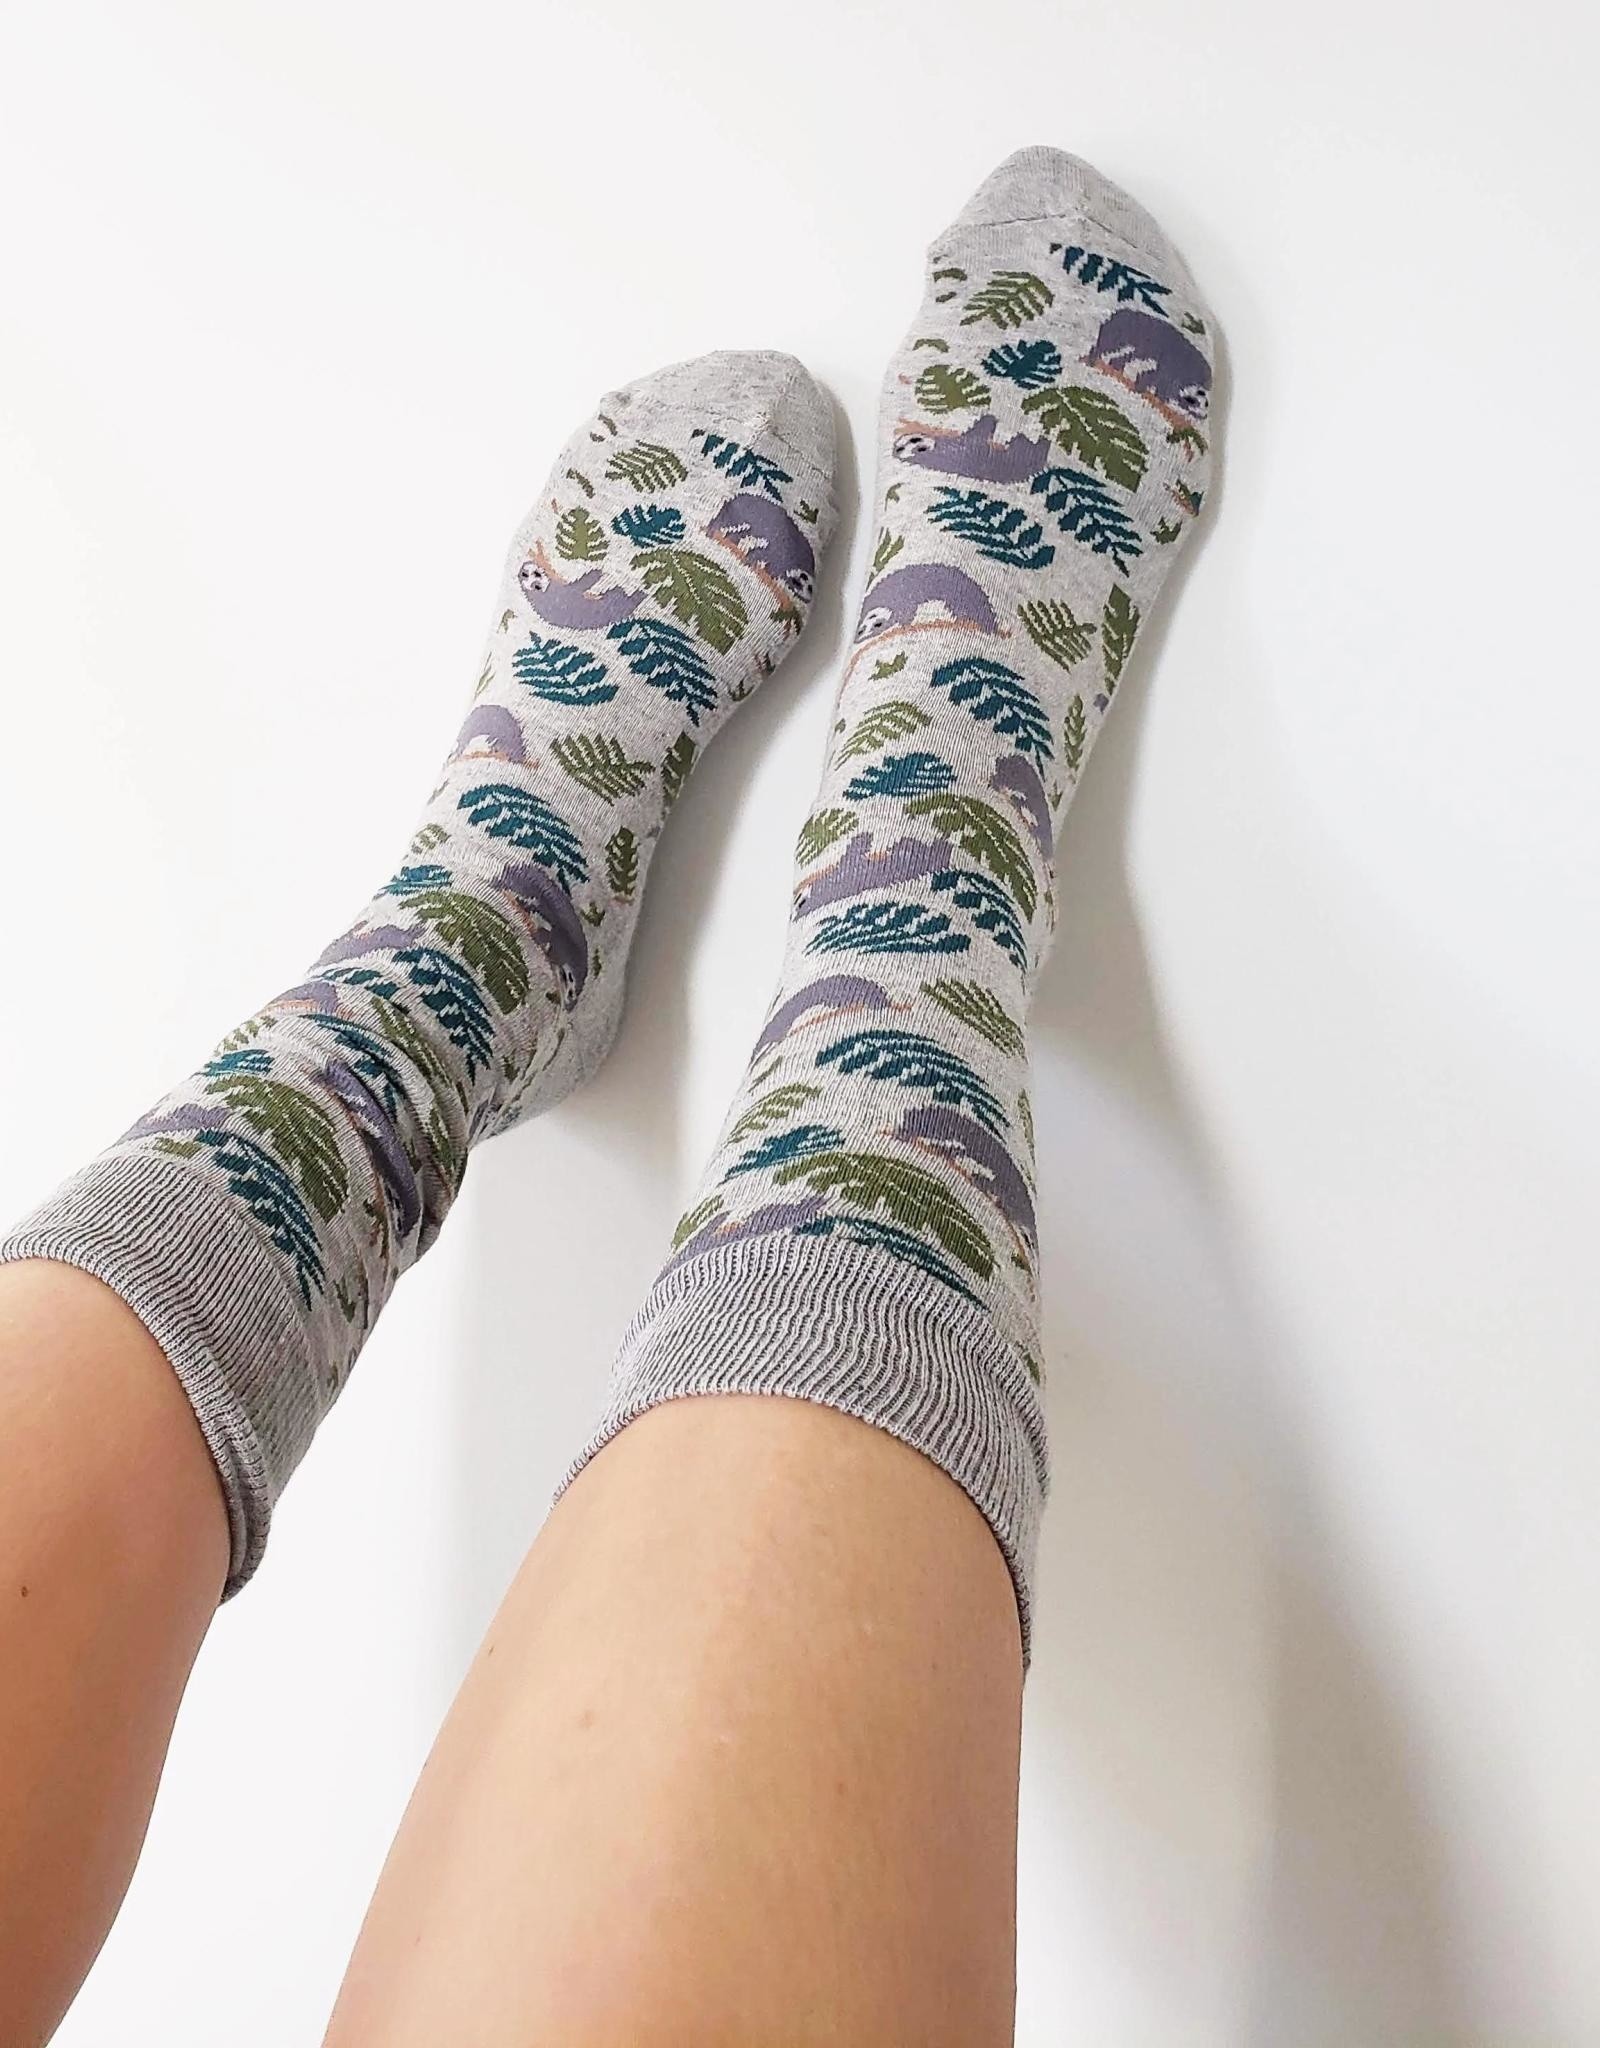 Conscious Step Socks that Protect Sloths